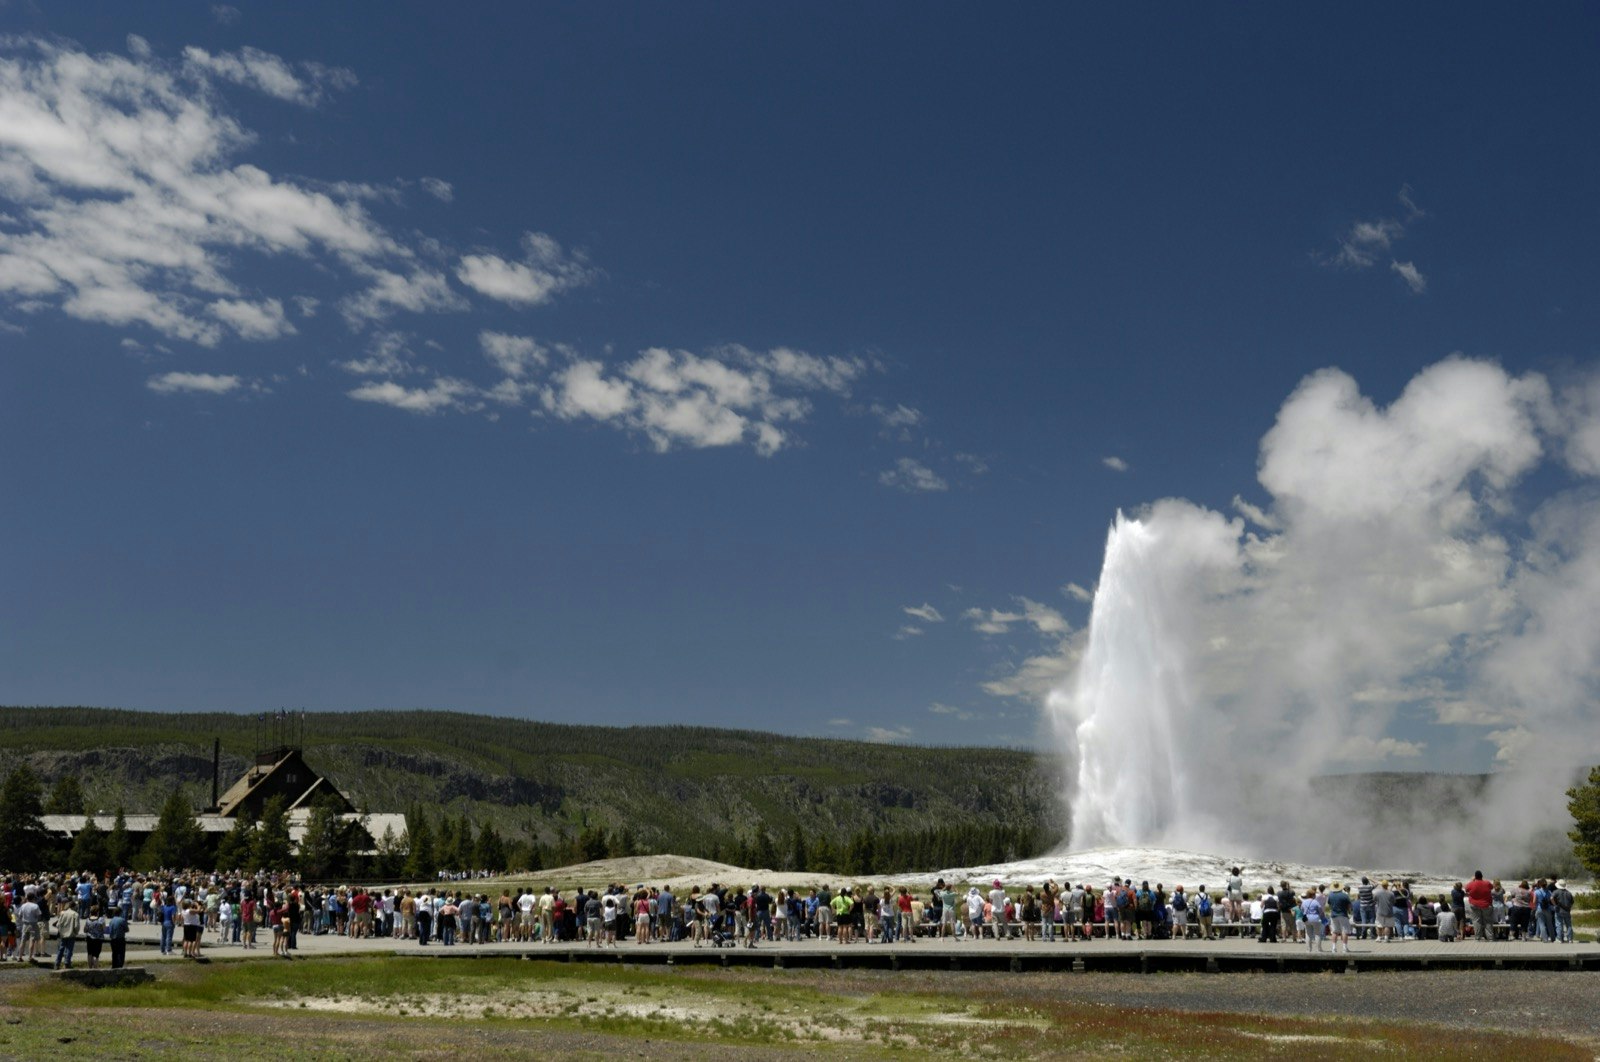 Crowds of people surround the Old Faithful geyser on a summer day during tourist season at Yellowstone National Park